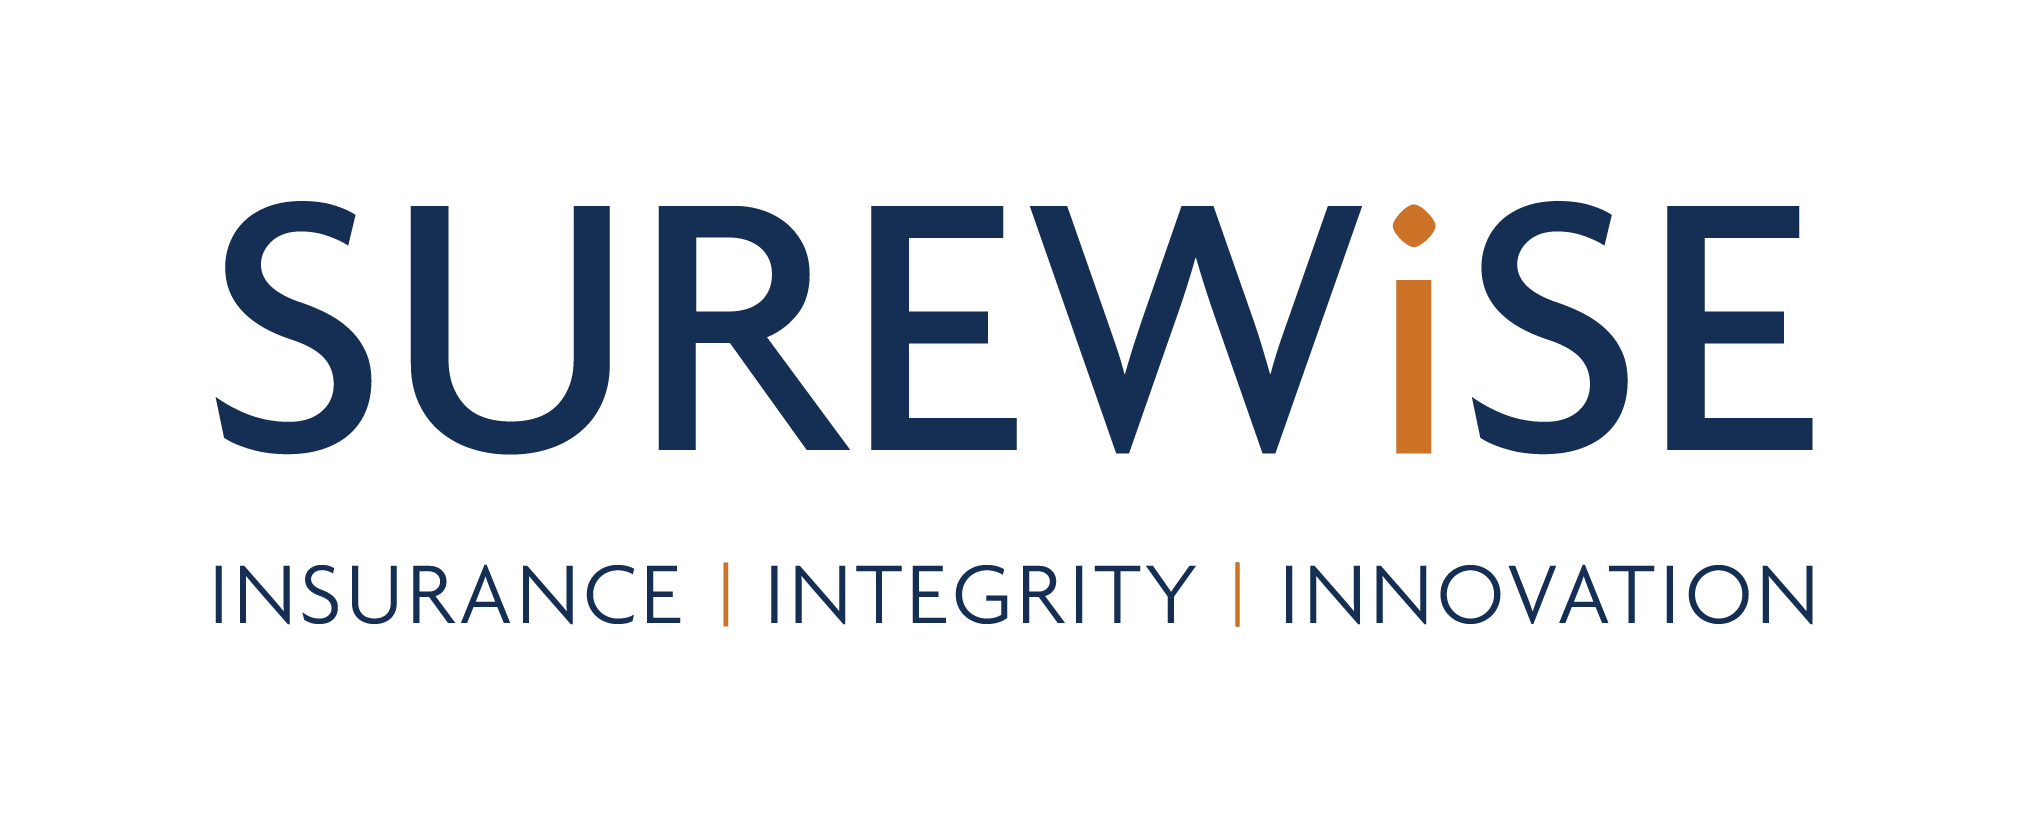 Surewise Insurance Integrity Innovation logo png image photo pic